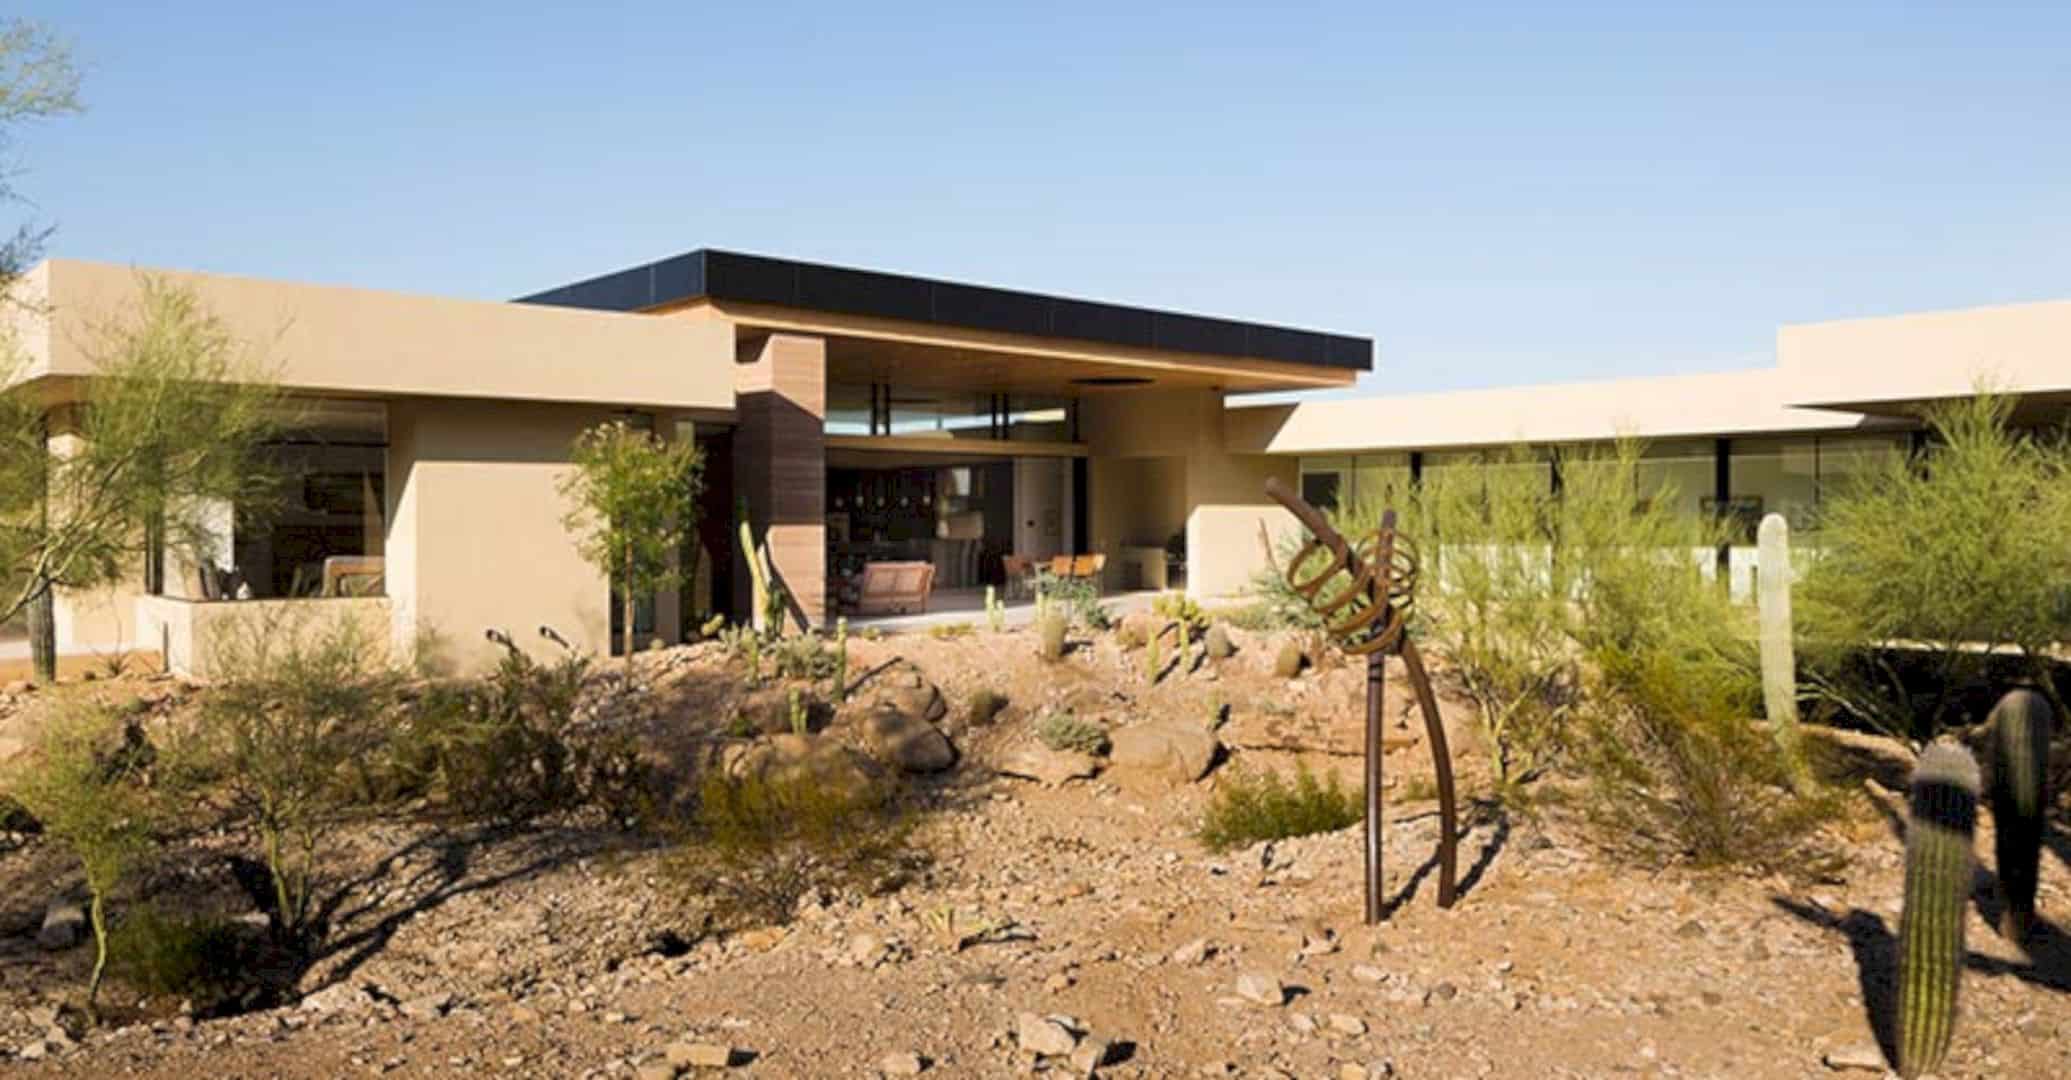 Desert Wash Residence A Modern Desert Home Defining Paradise Valleys Topographical Feature 1